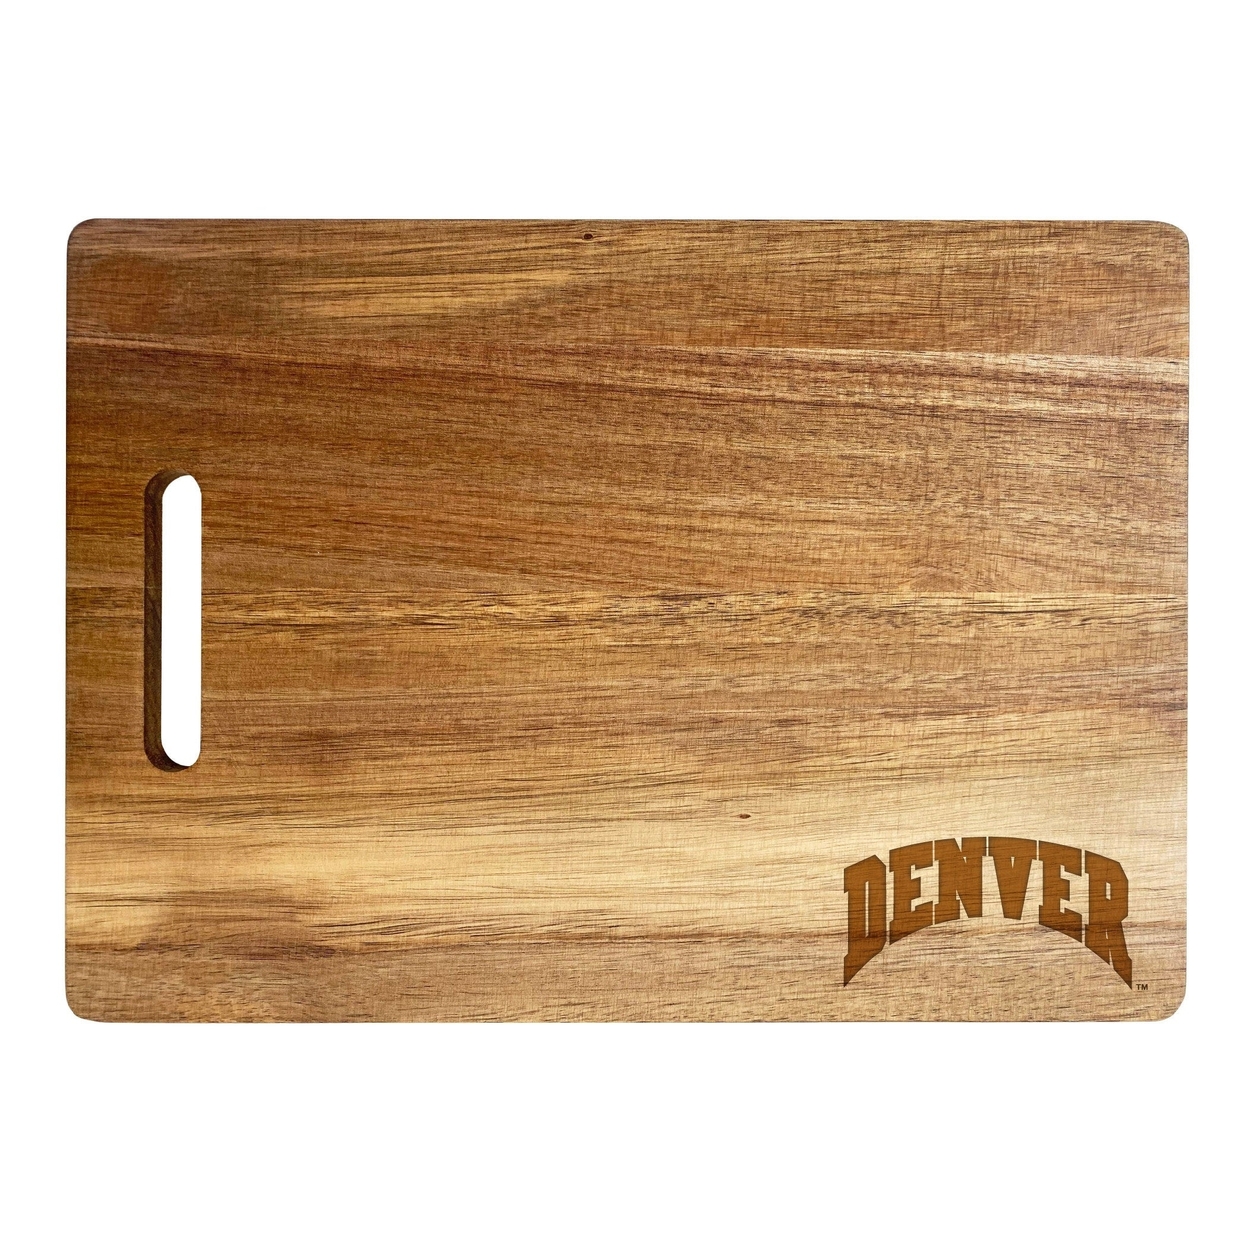 University Of Denver Pioneers Engraved Wooden Cutting Board 10 X 14 Acacia Wood - Small Engraving